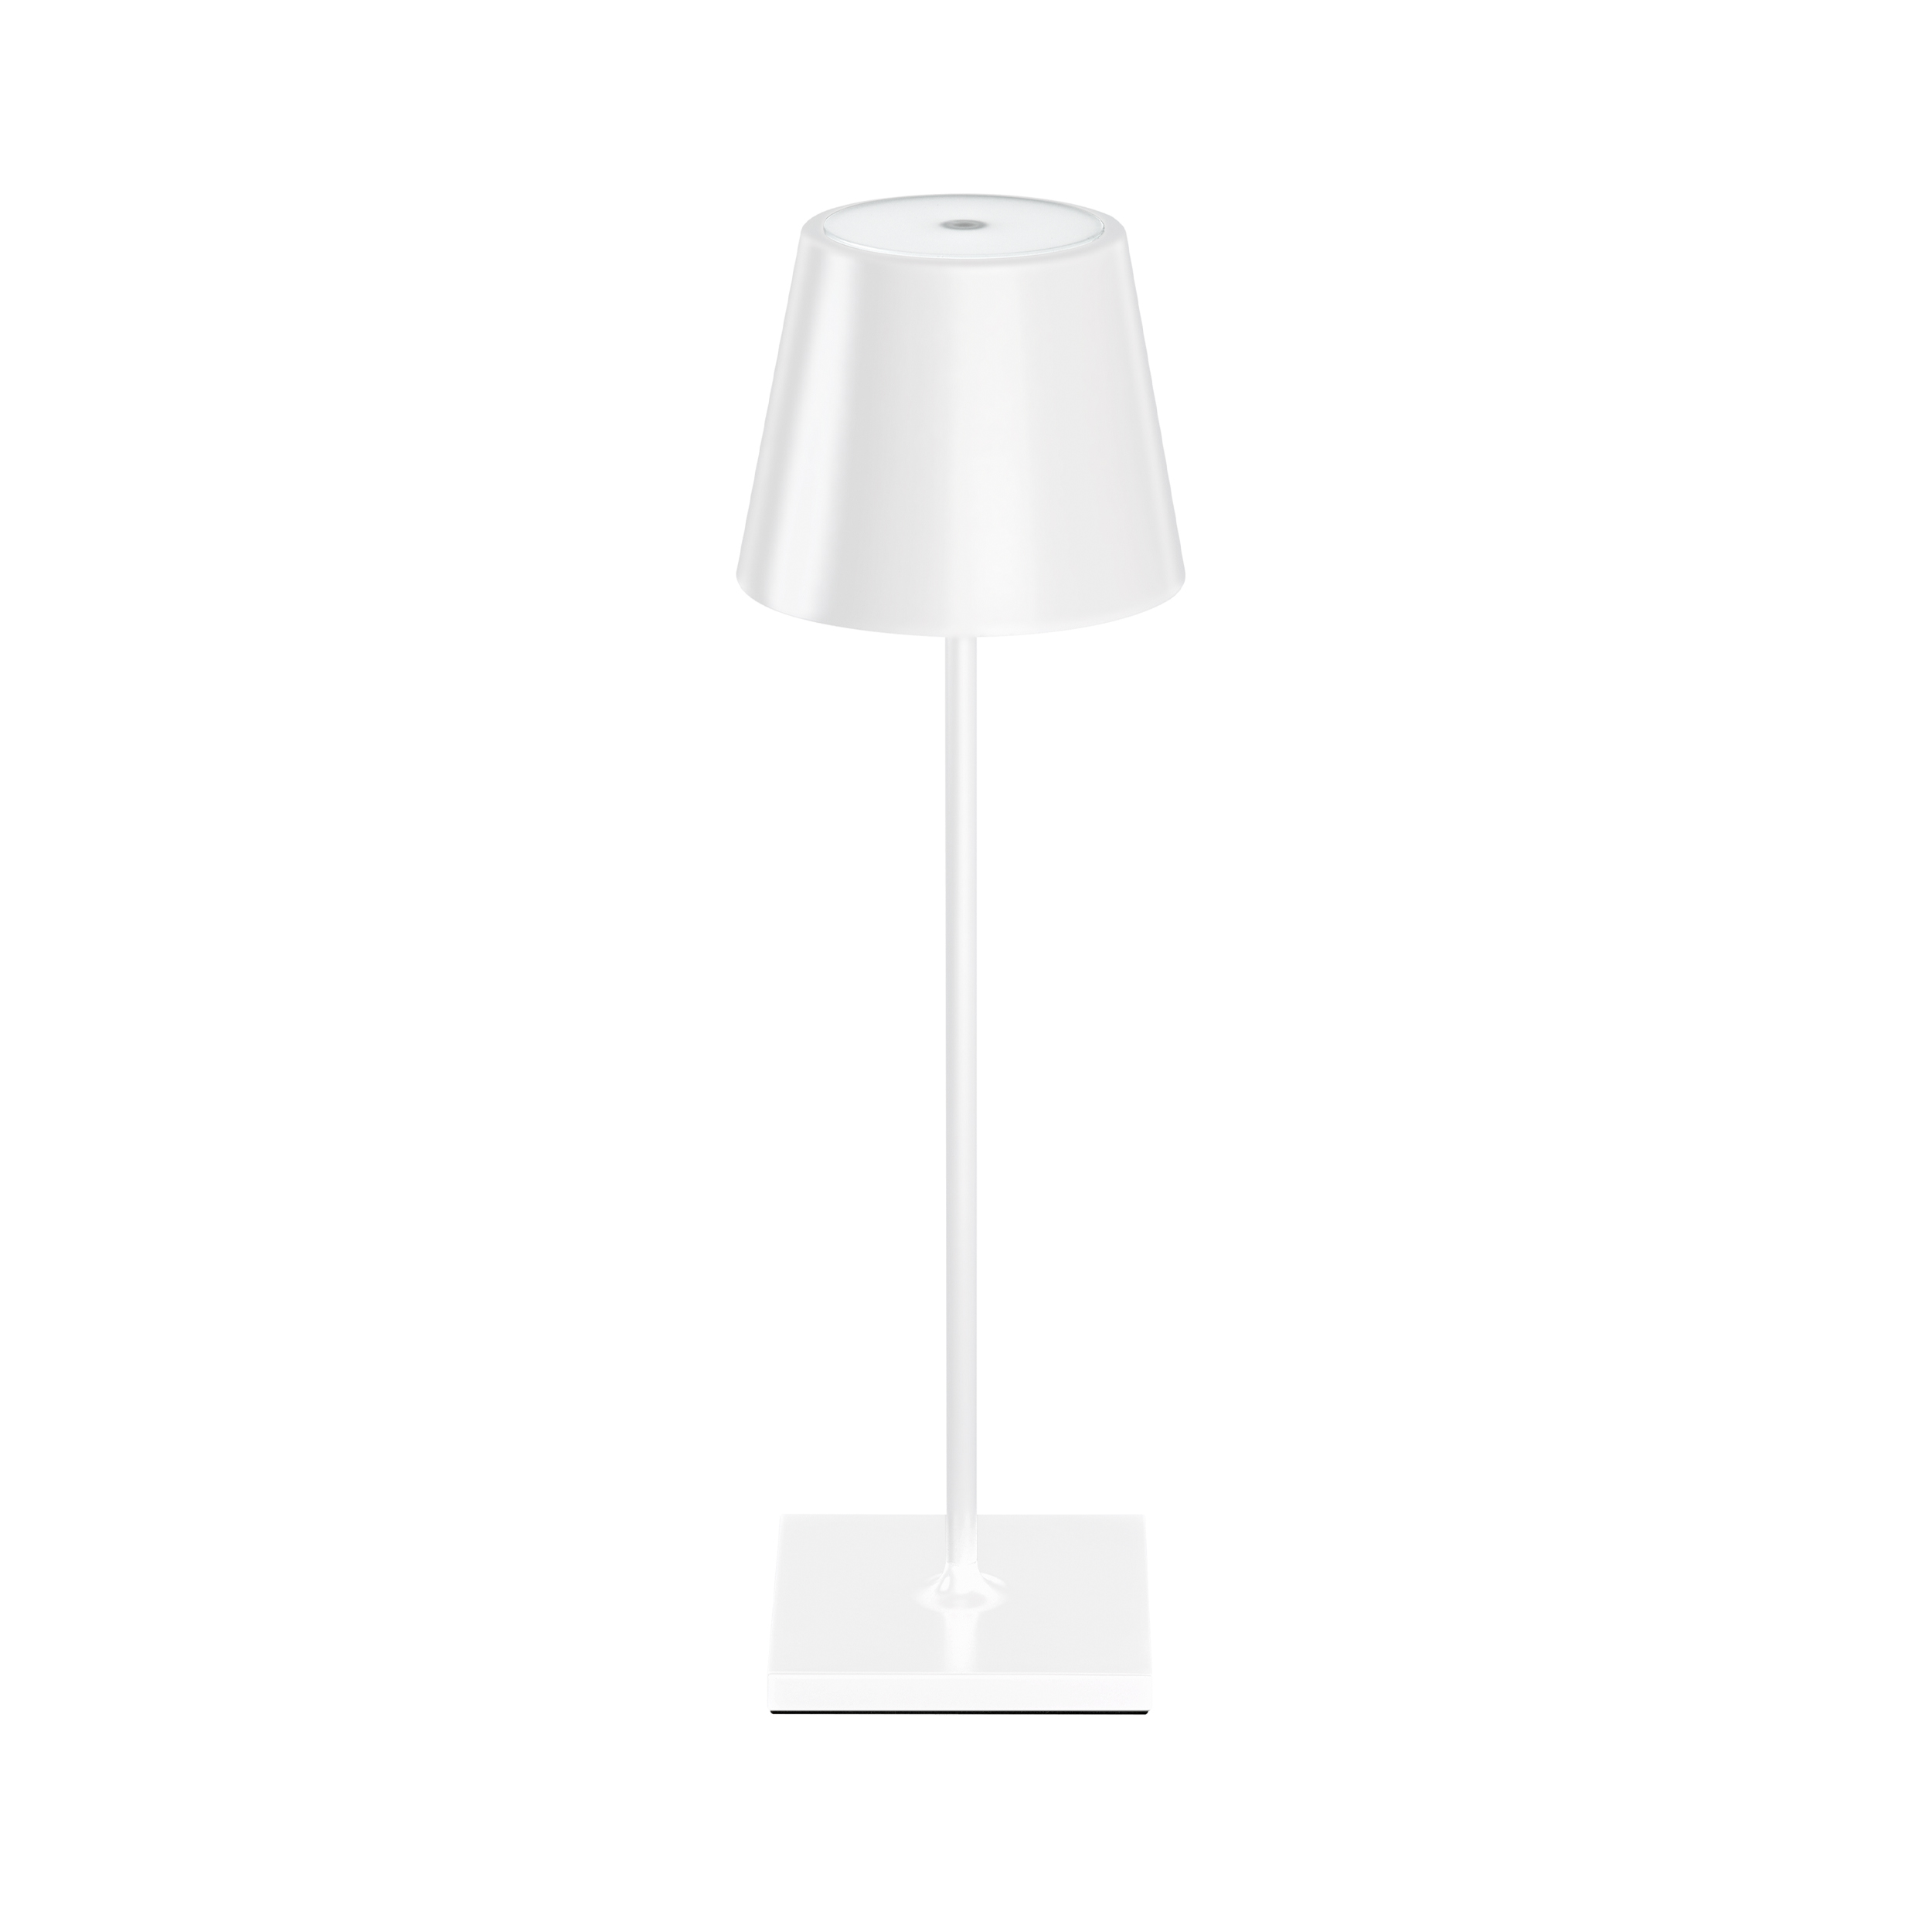 SIGOR NUINDIE Schneeweiss warmweiss Table Lamp LED